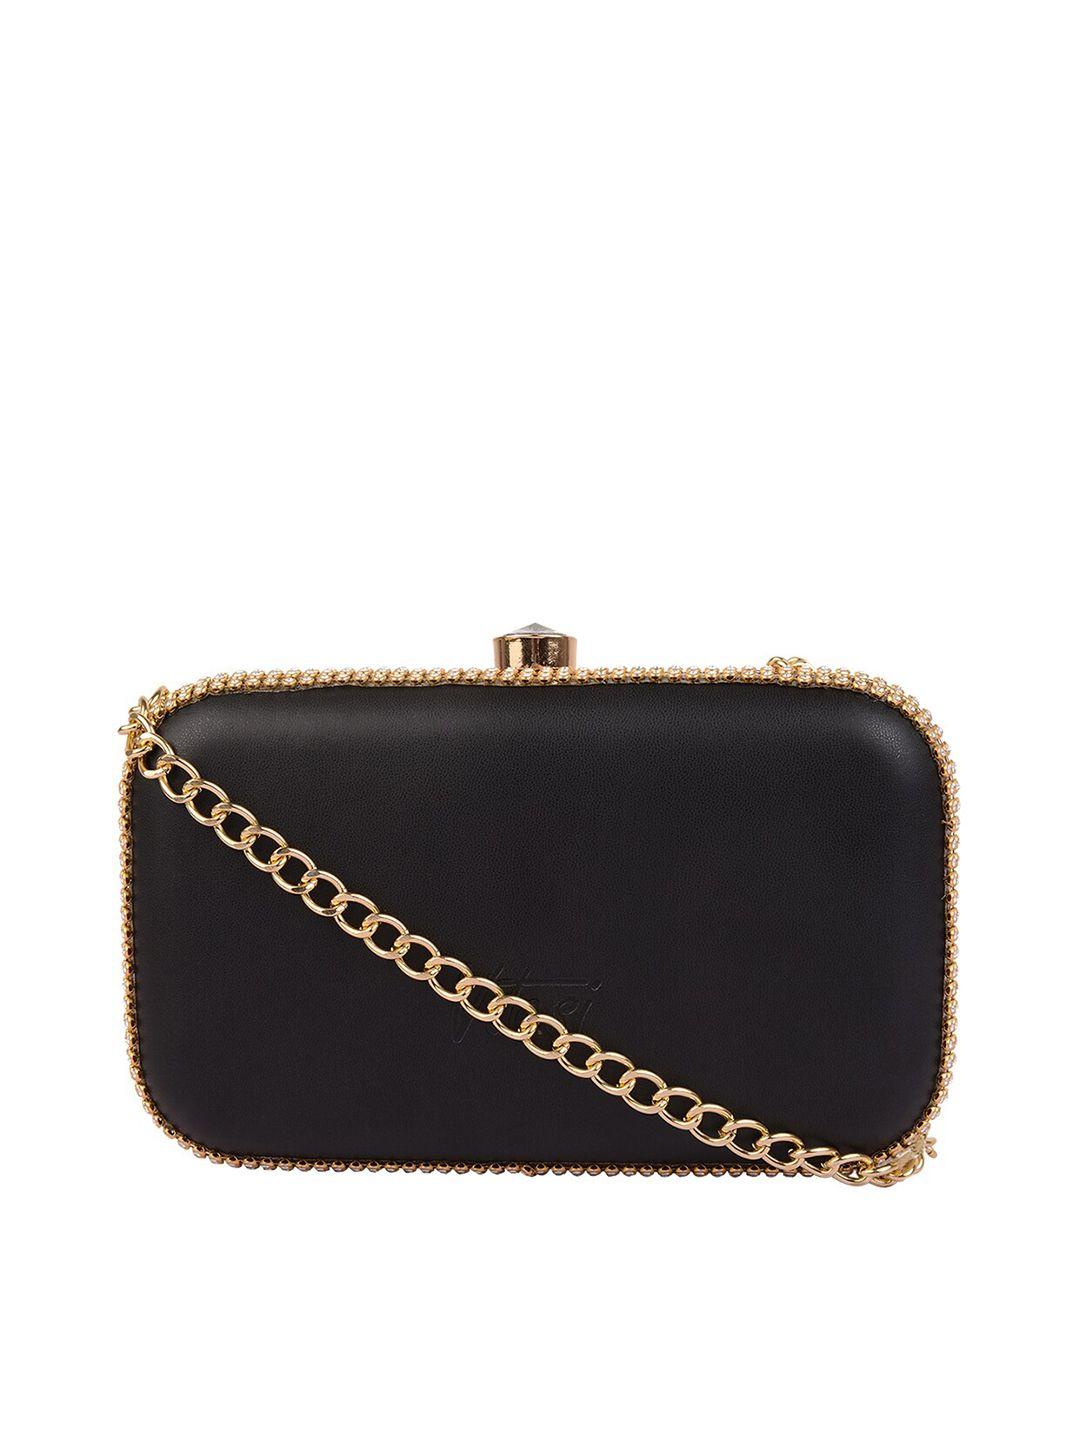 vdesi black & gold-toned embellished box clutch with metal strap